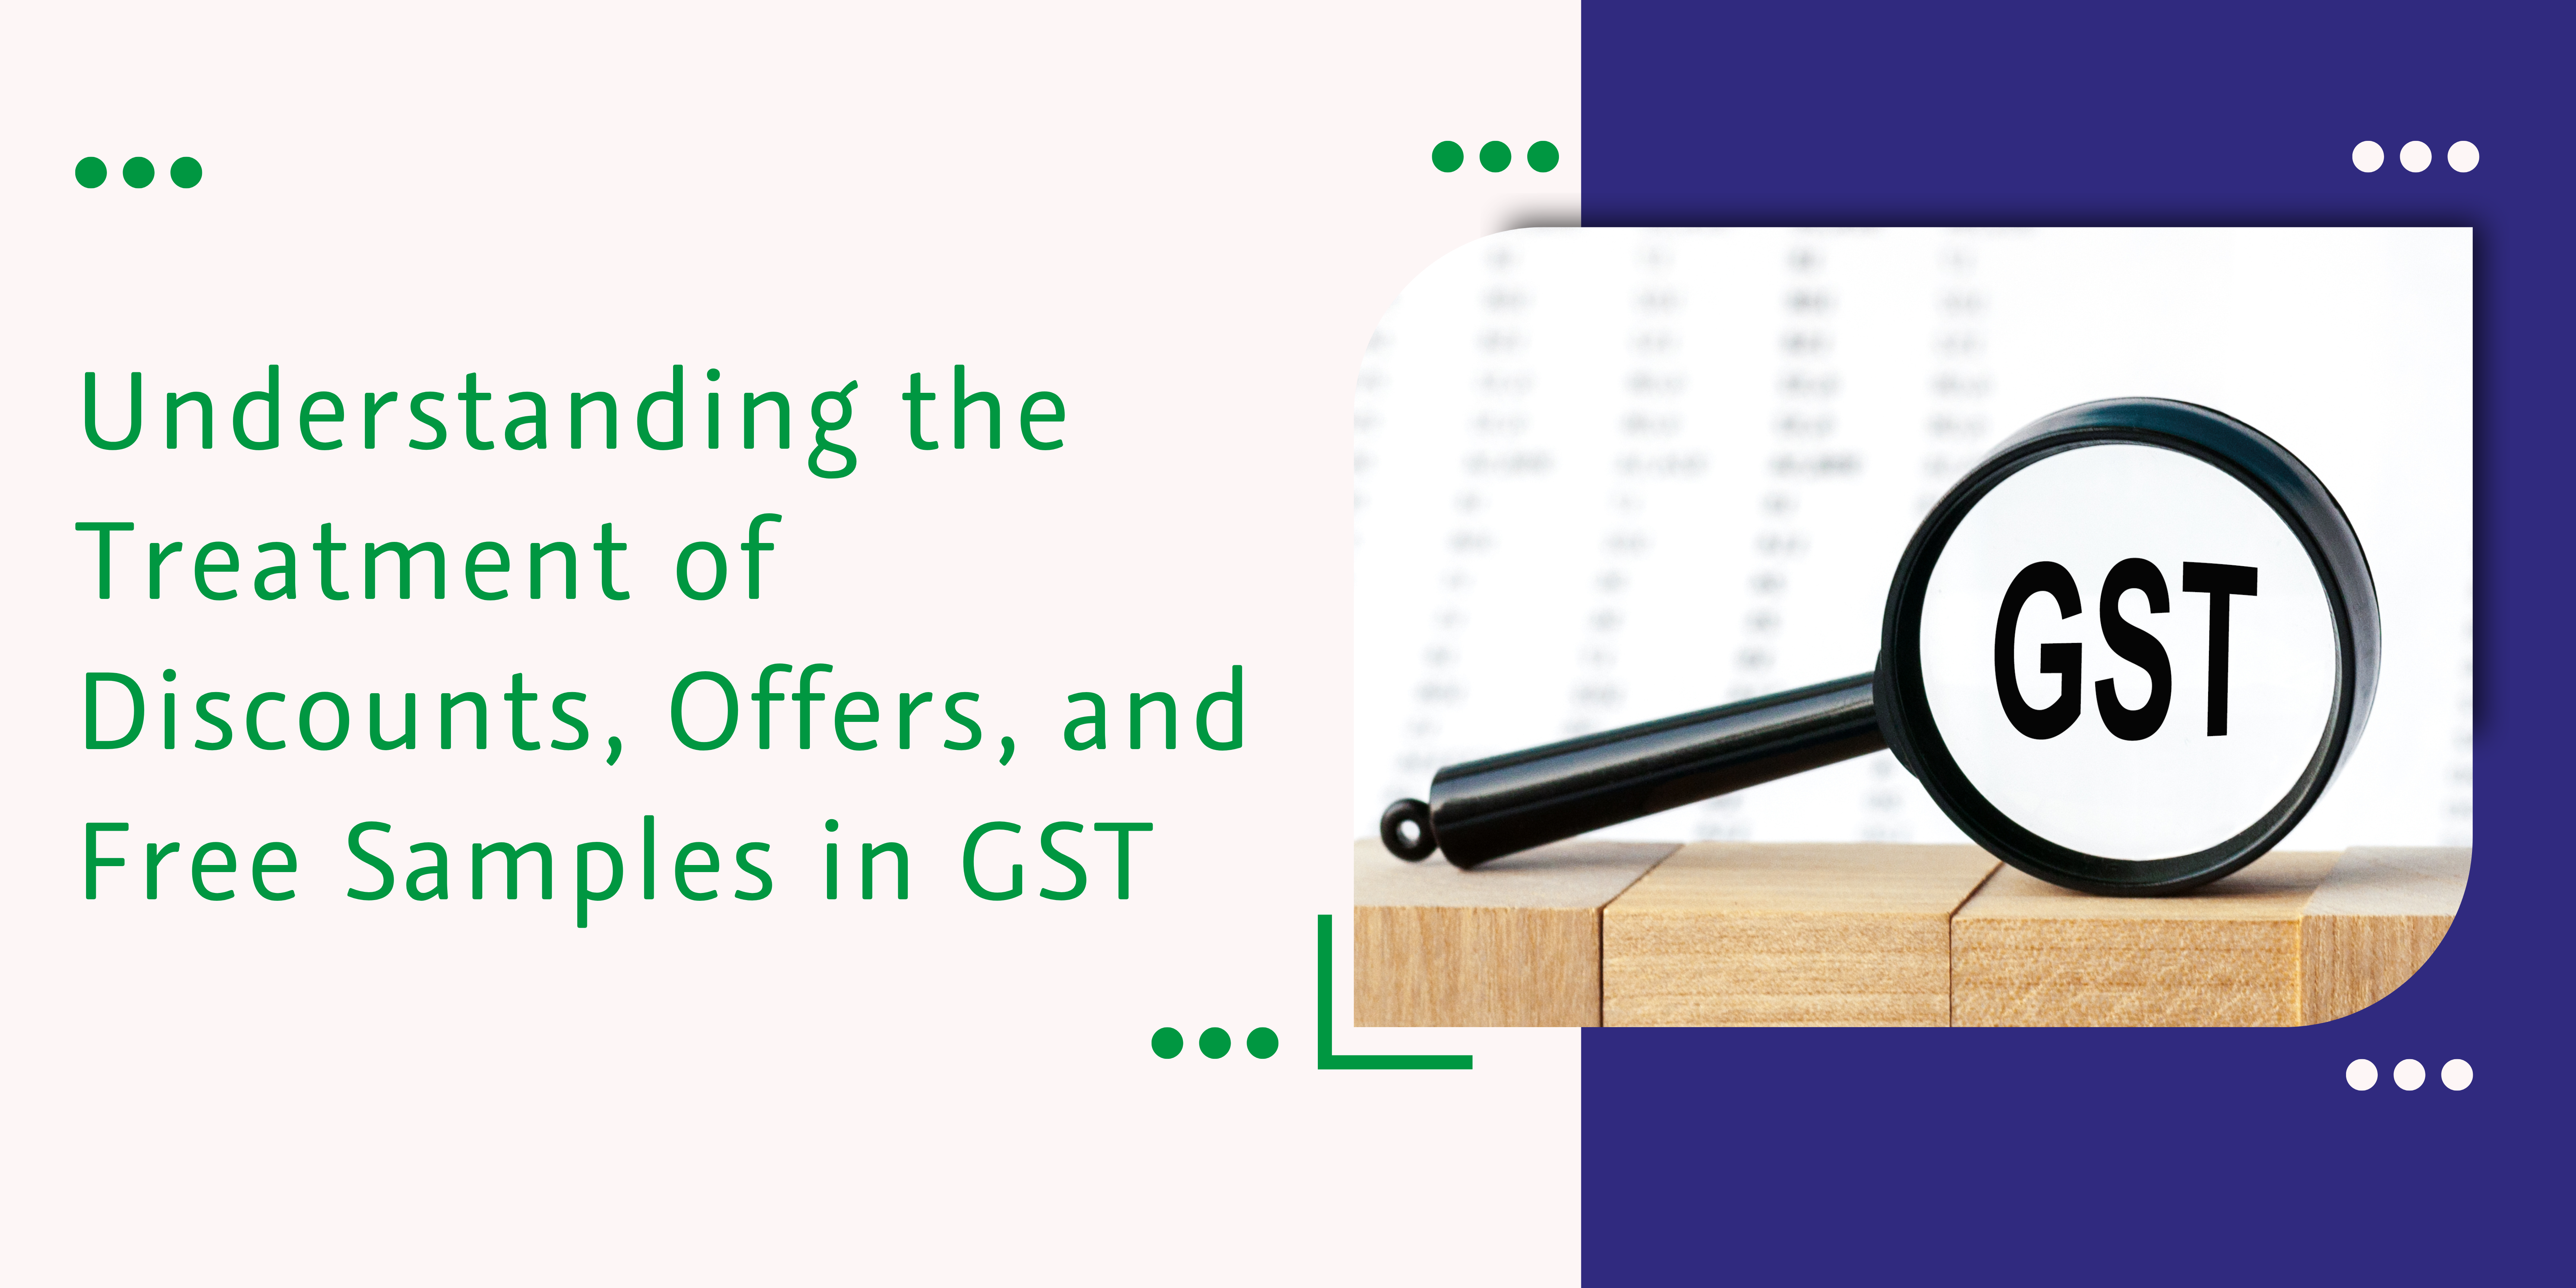 understanding the treatment of discounts, offers, and free samples in gst